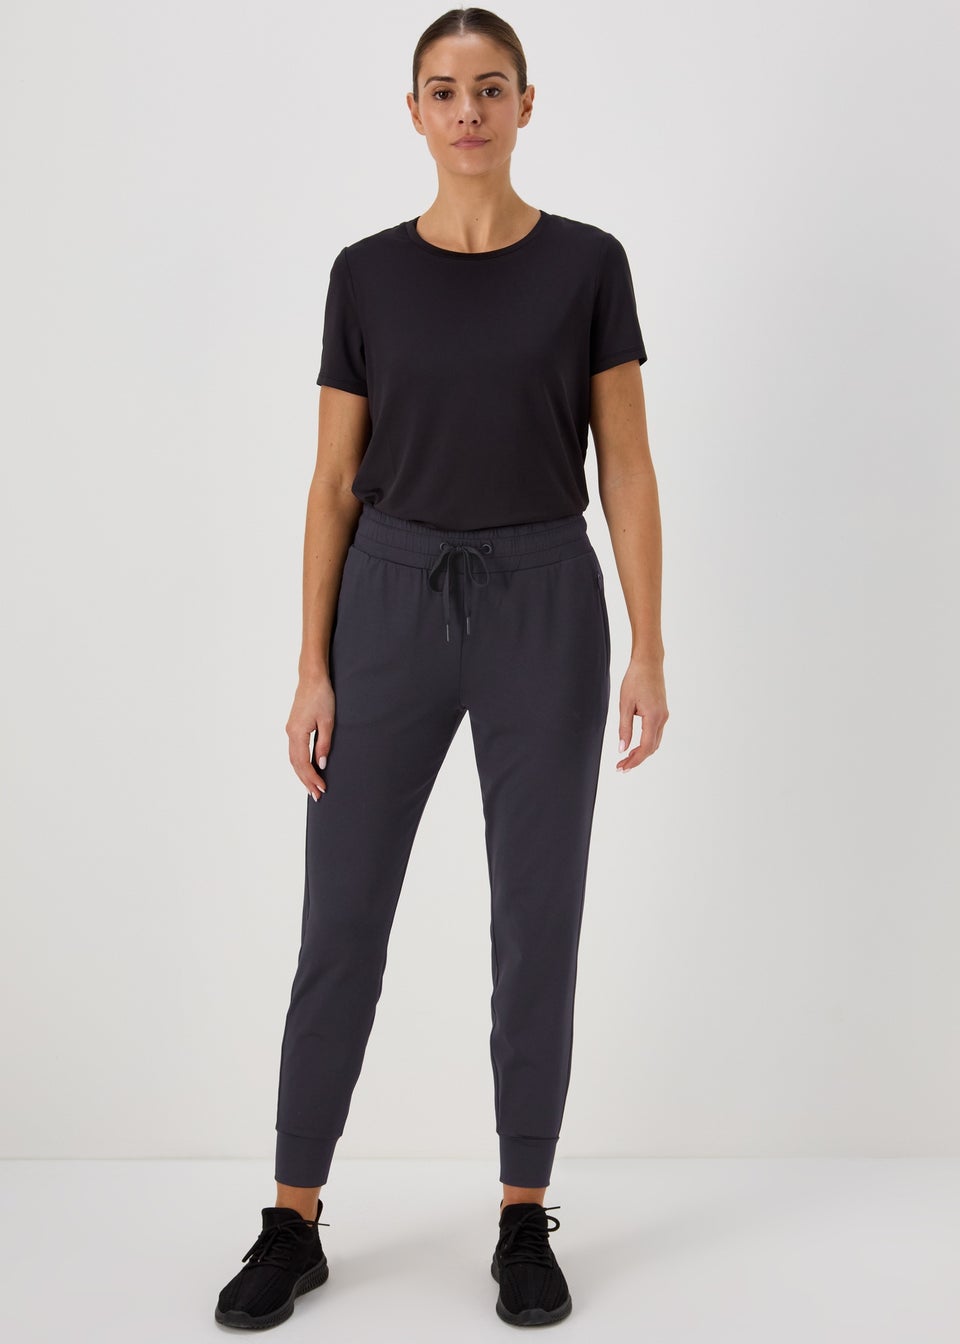 Souluxe Black Active Sports Joggers